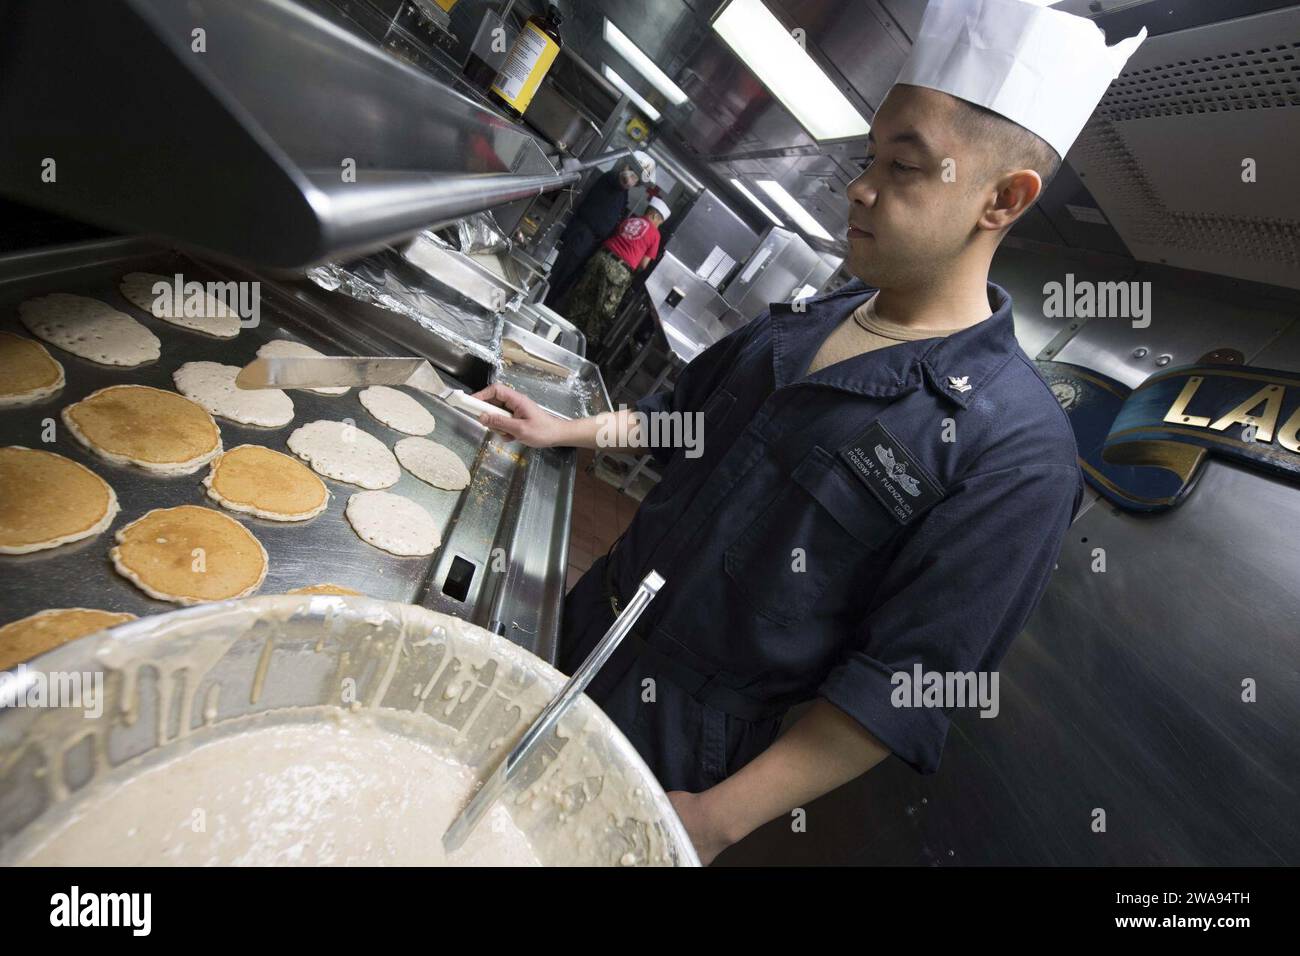 US military forces. 180429KP946-0026 MEDITERRANEAN SEA  (April 29, 2018) Culinary Specialist 2nd Class Julian Fuenzalida, from Houston, prepares pancakes aboard the Arleigh Burke-class guided-missile destroyer USS Donald Cook (DDG 75) April 29, 2018.  Donald Cook, forward-deployed to Rota, Spain, is on its seventh patrol in the U.S. 6th Fleet area of operations in support of regional allies and partners, and U.S. national security interests in Europe and Africa. (U.S. Navy photo by Mass Communication Specialist 2nd Class Alyssa Weeks / Released) Stock Photo